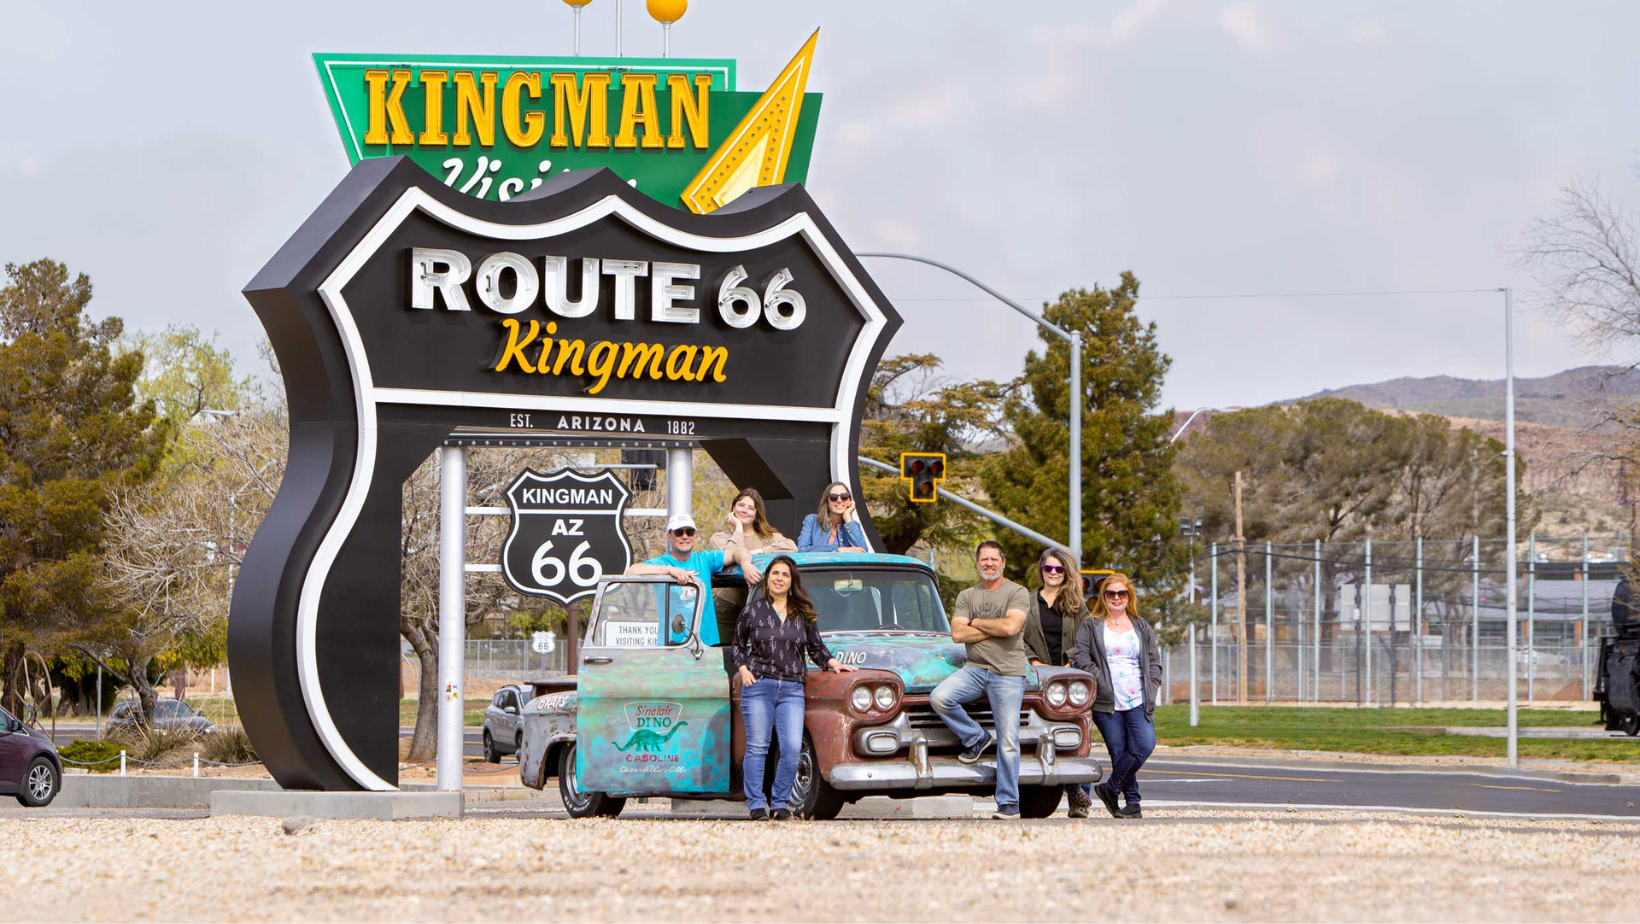 downtown kingman sign over road